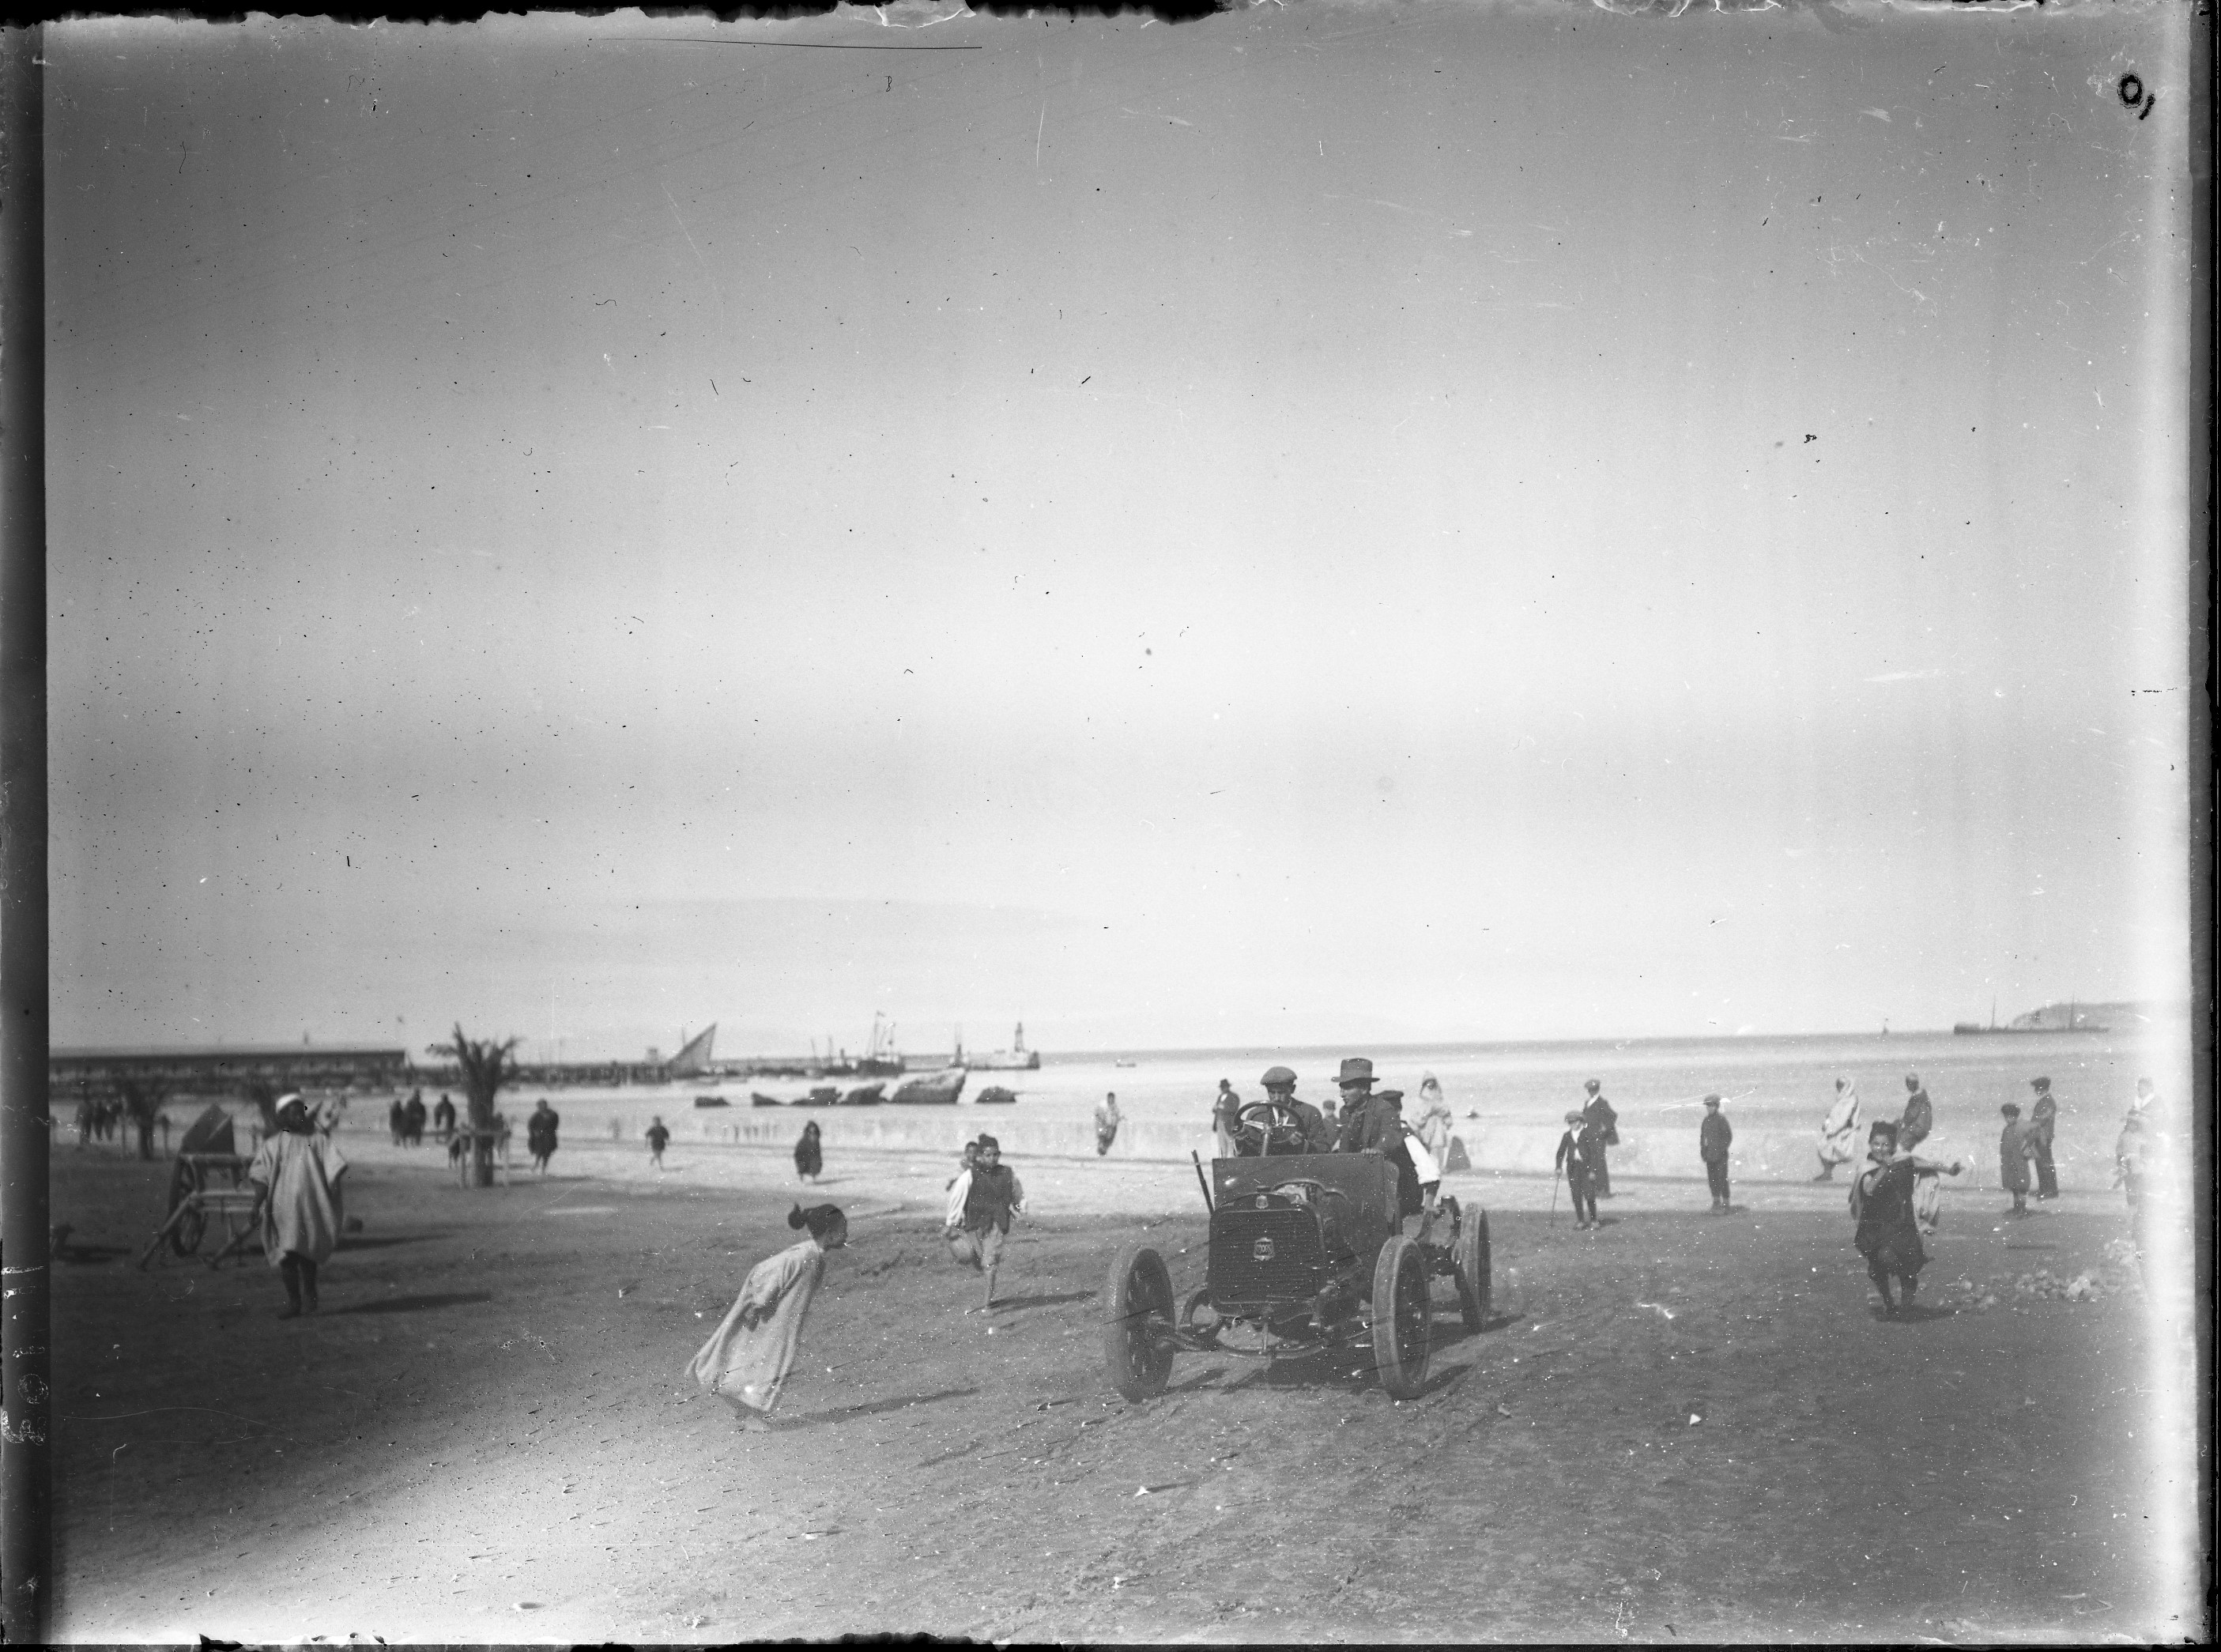 Port (Tangier) - <p>View toward the port of Tangier of two men driving a car among children playing on the beach</p>